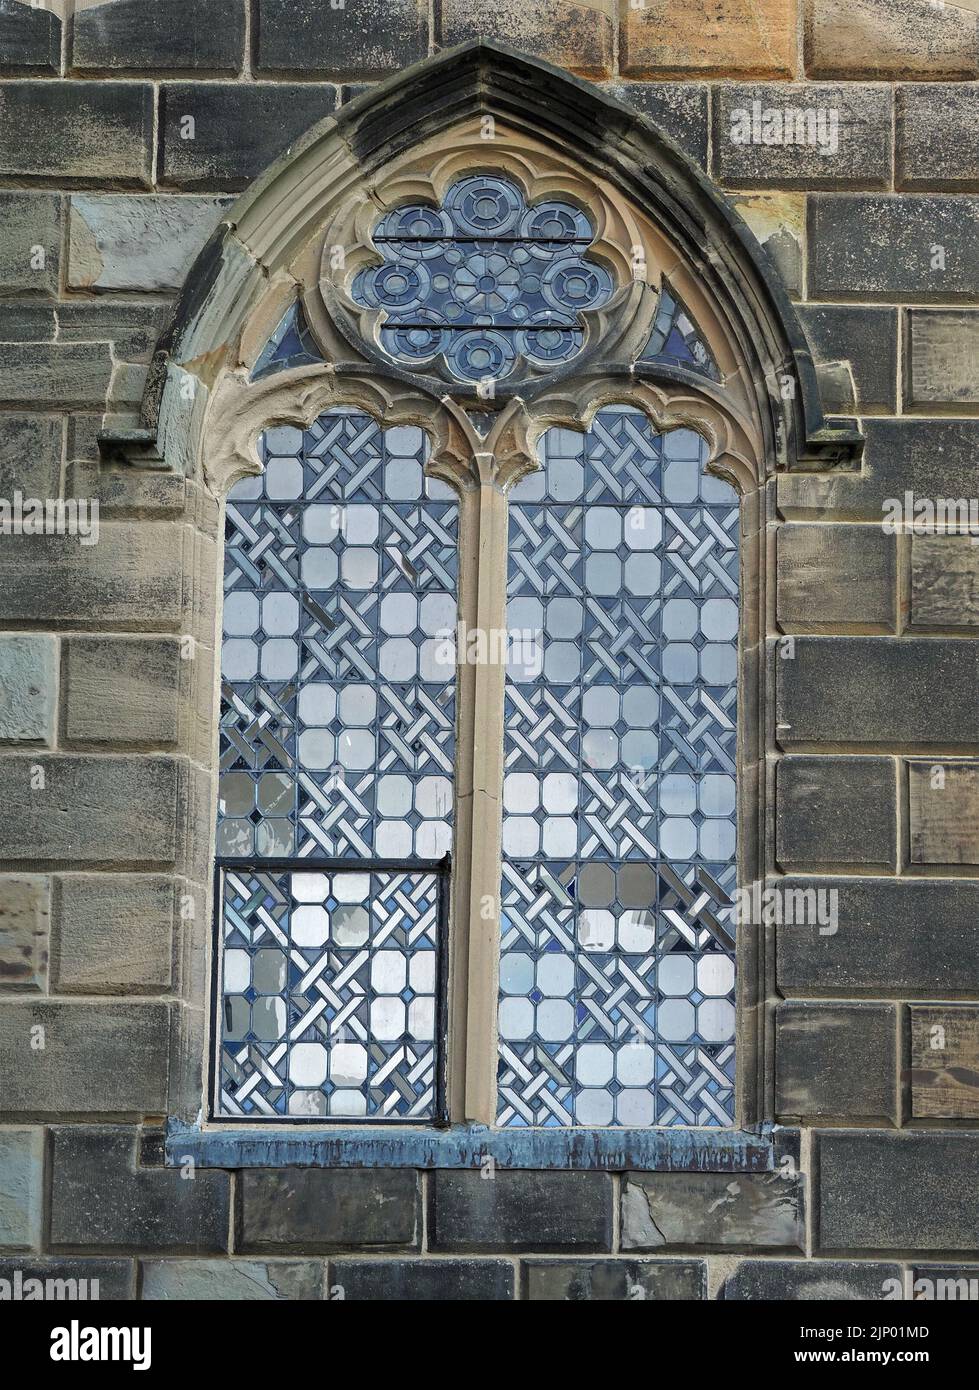 contrasting patterns in ancient glass of arched mullion window above stonework entrance to Bishop's Palace, Bishop Auckland, County Durham, England UK Stock Photo